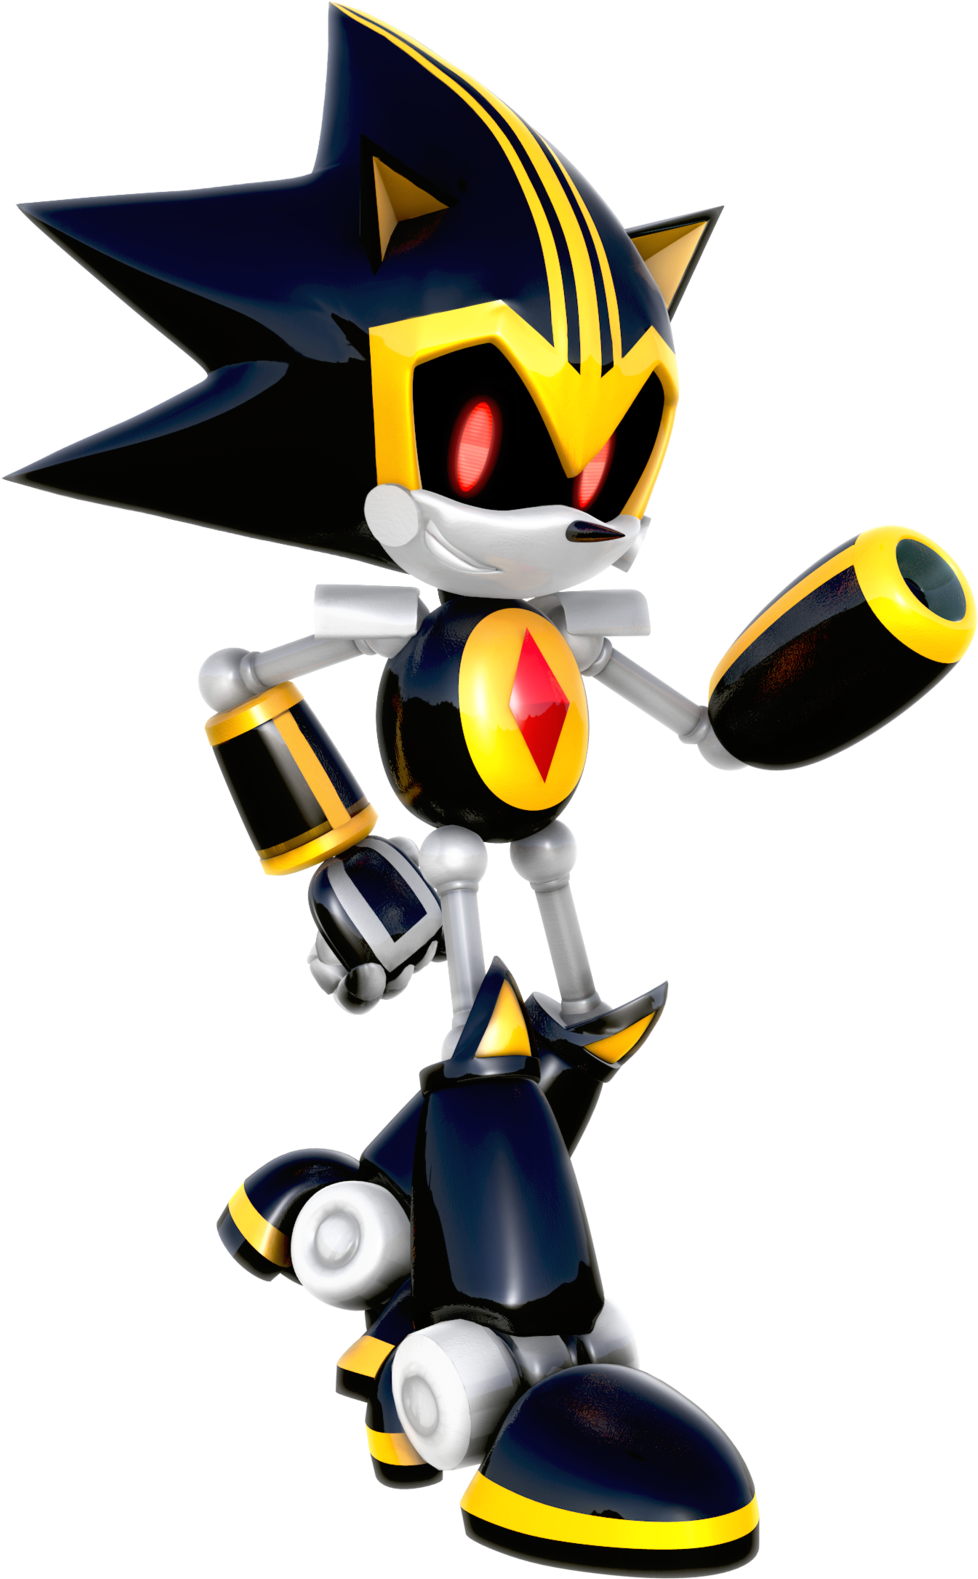 Shard The Metal Sonic Render By Nibroc-rock - Shard The Metal Sonic (1600x1600)